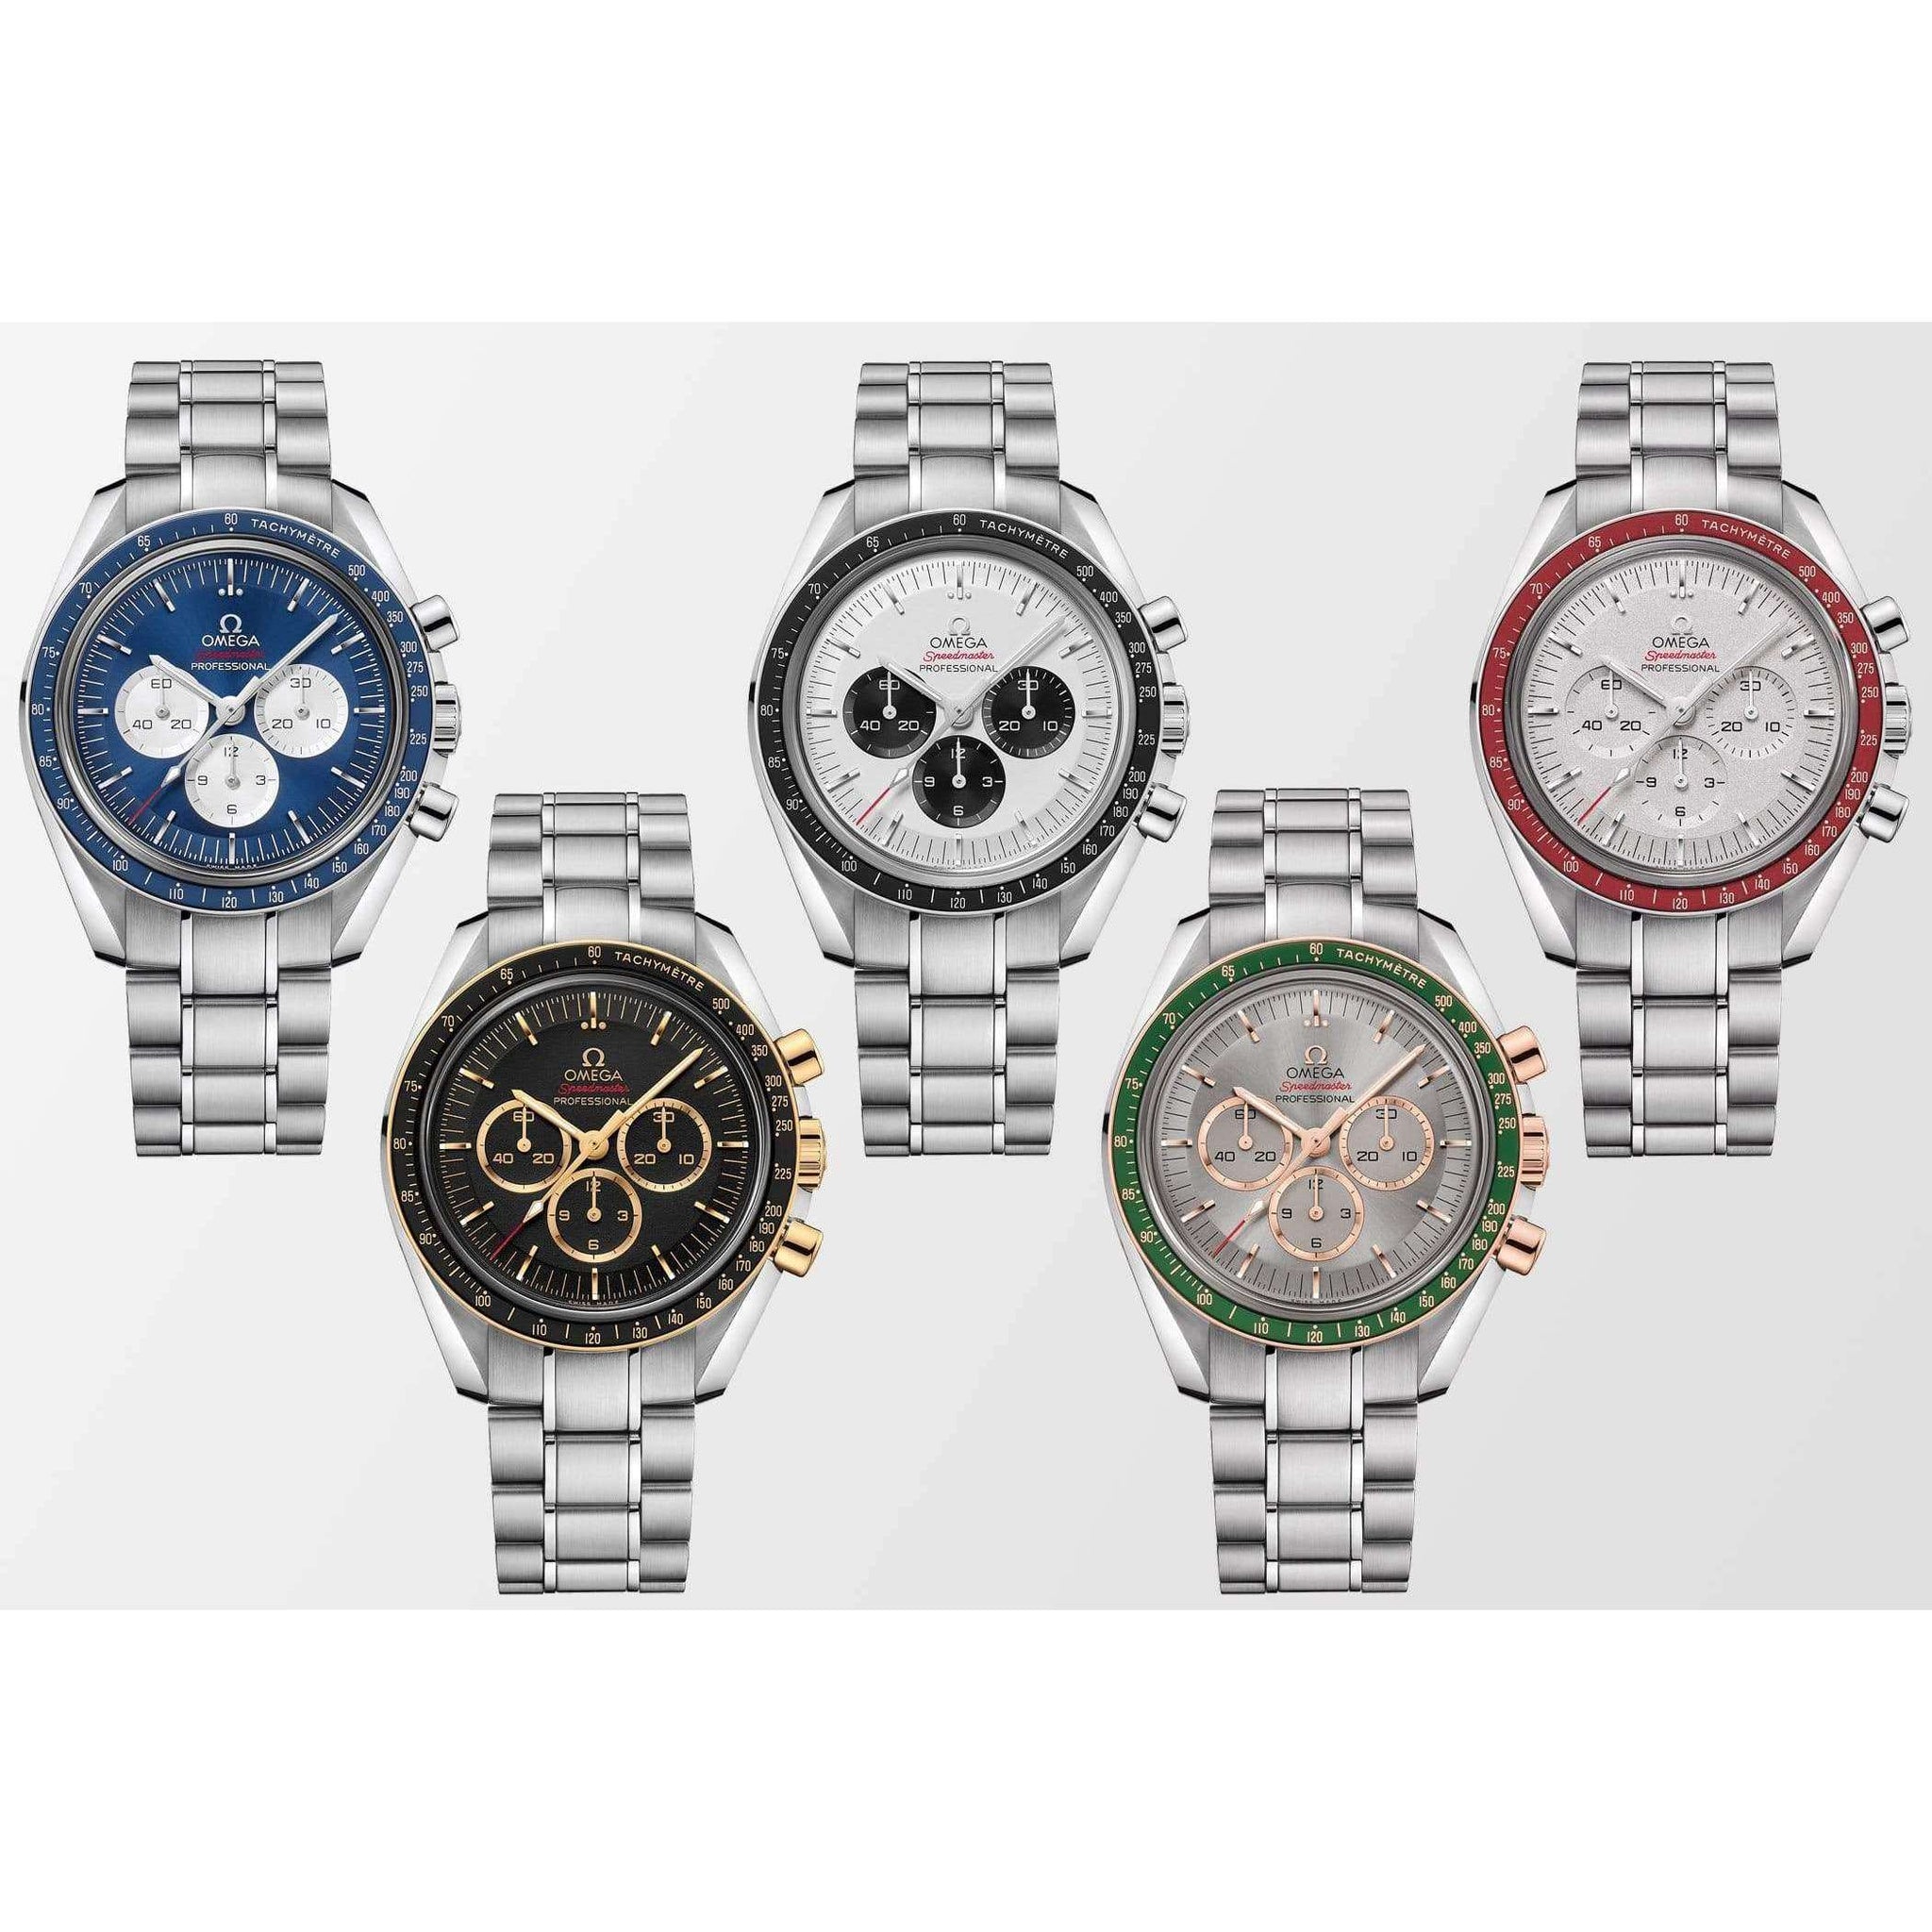 THE NEW OMEGA SPEEDMASTER TOKYO 2020 OLYMPICS COLLECTION ...